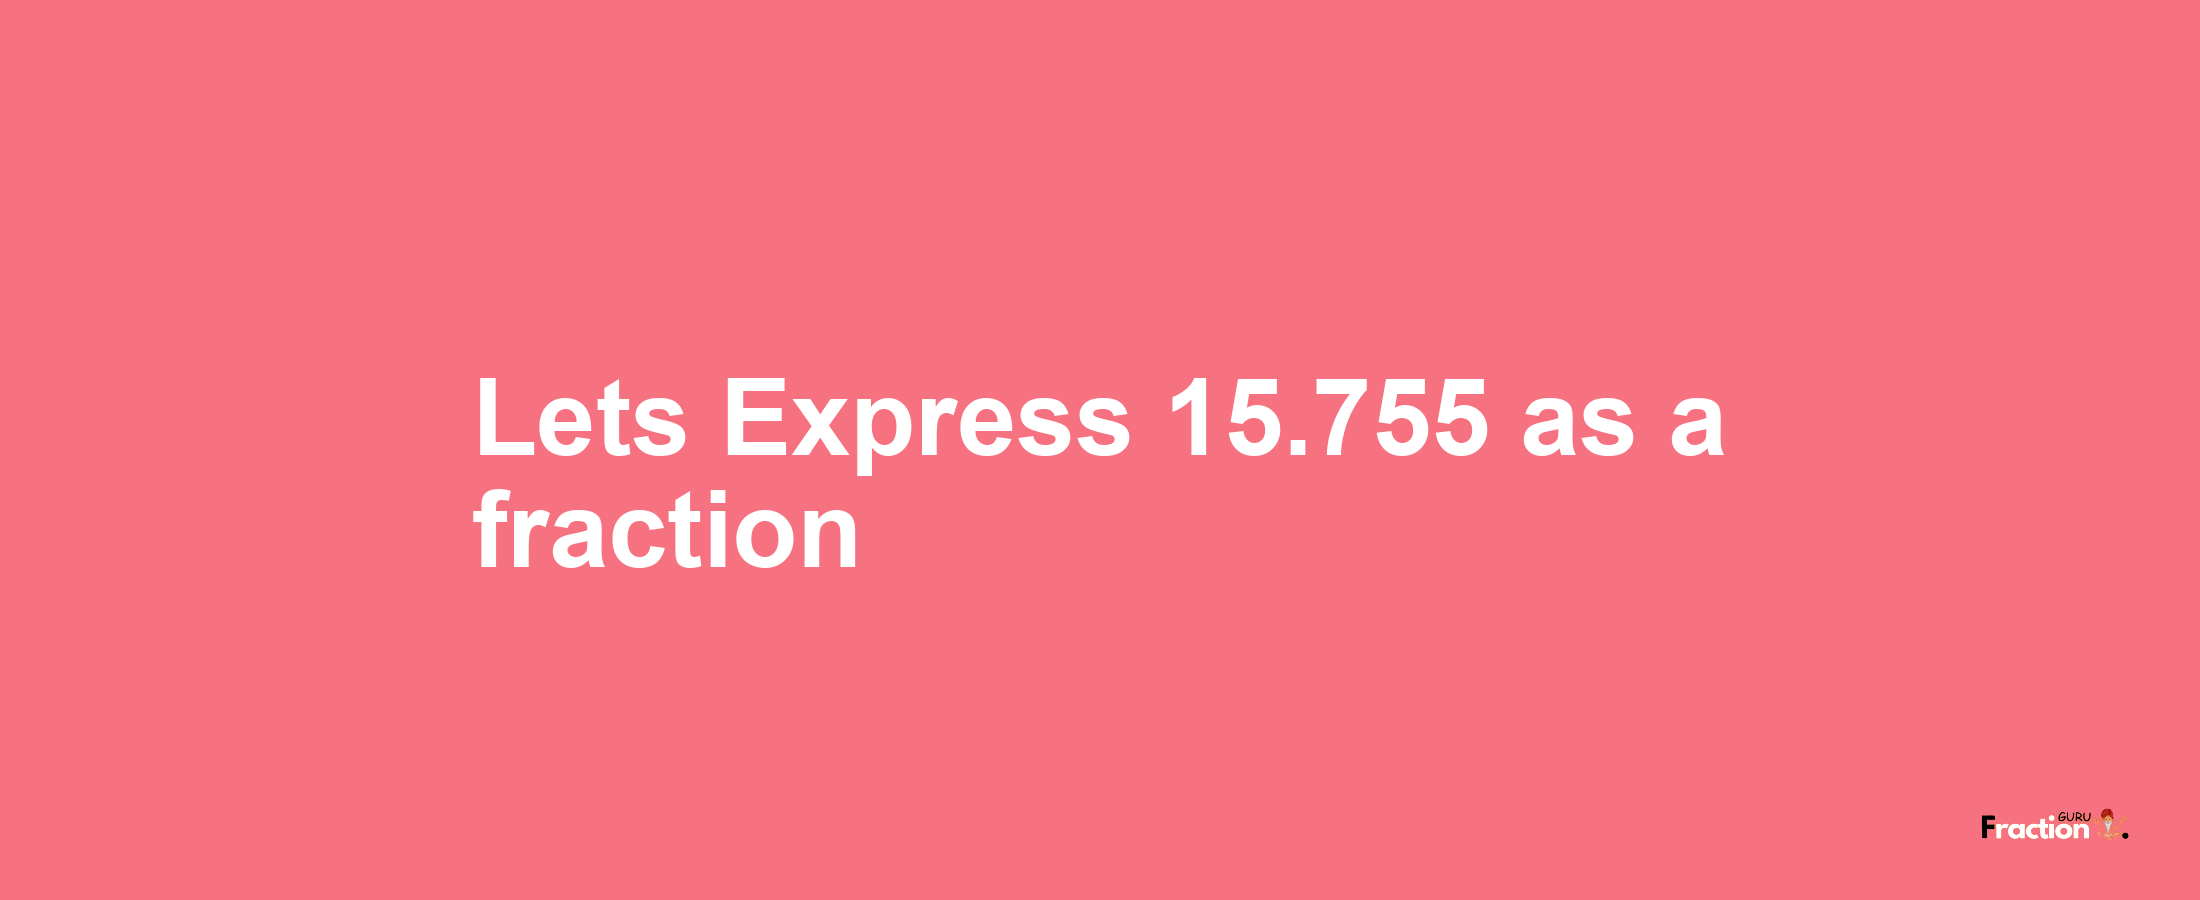 Lets Express 15.755 as afraction